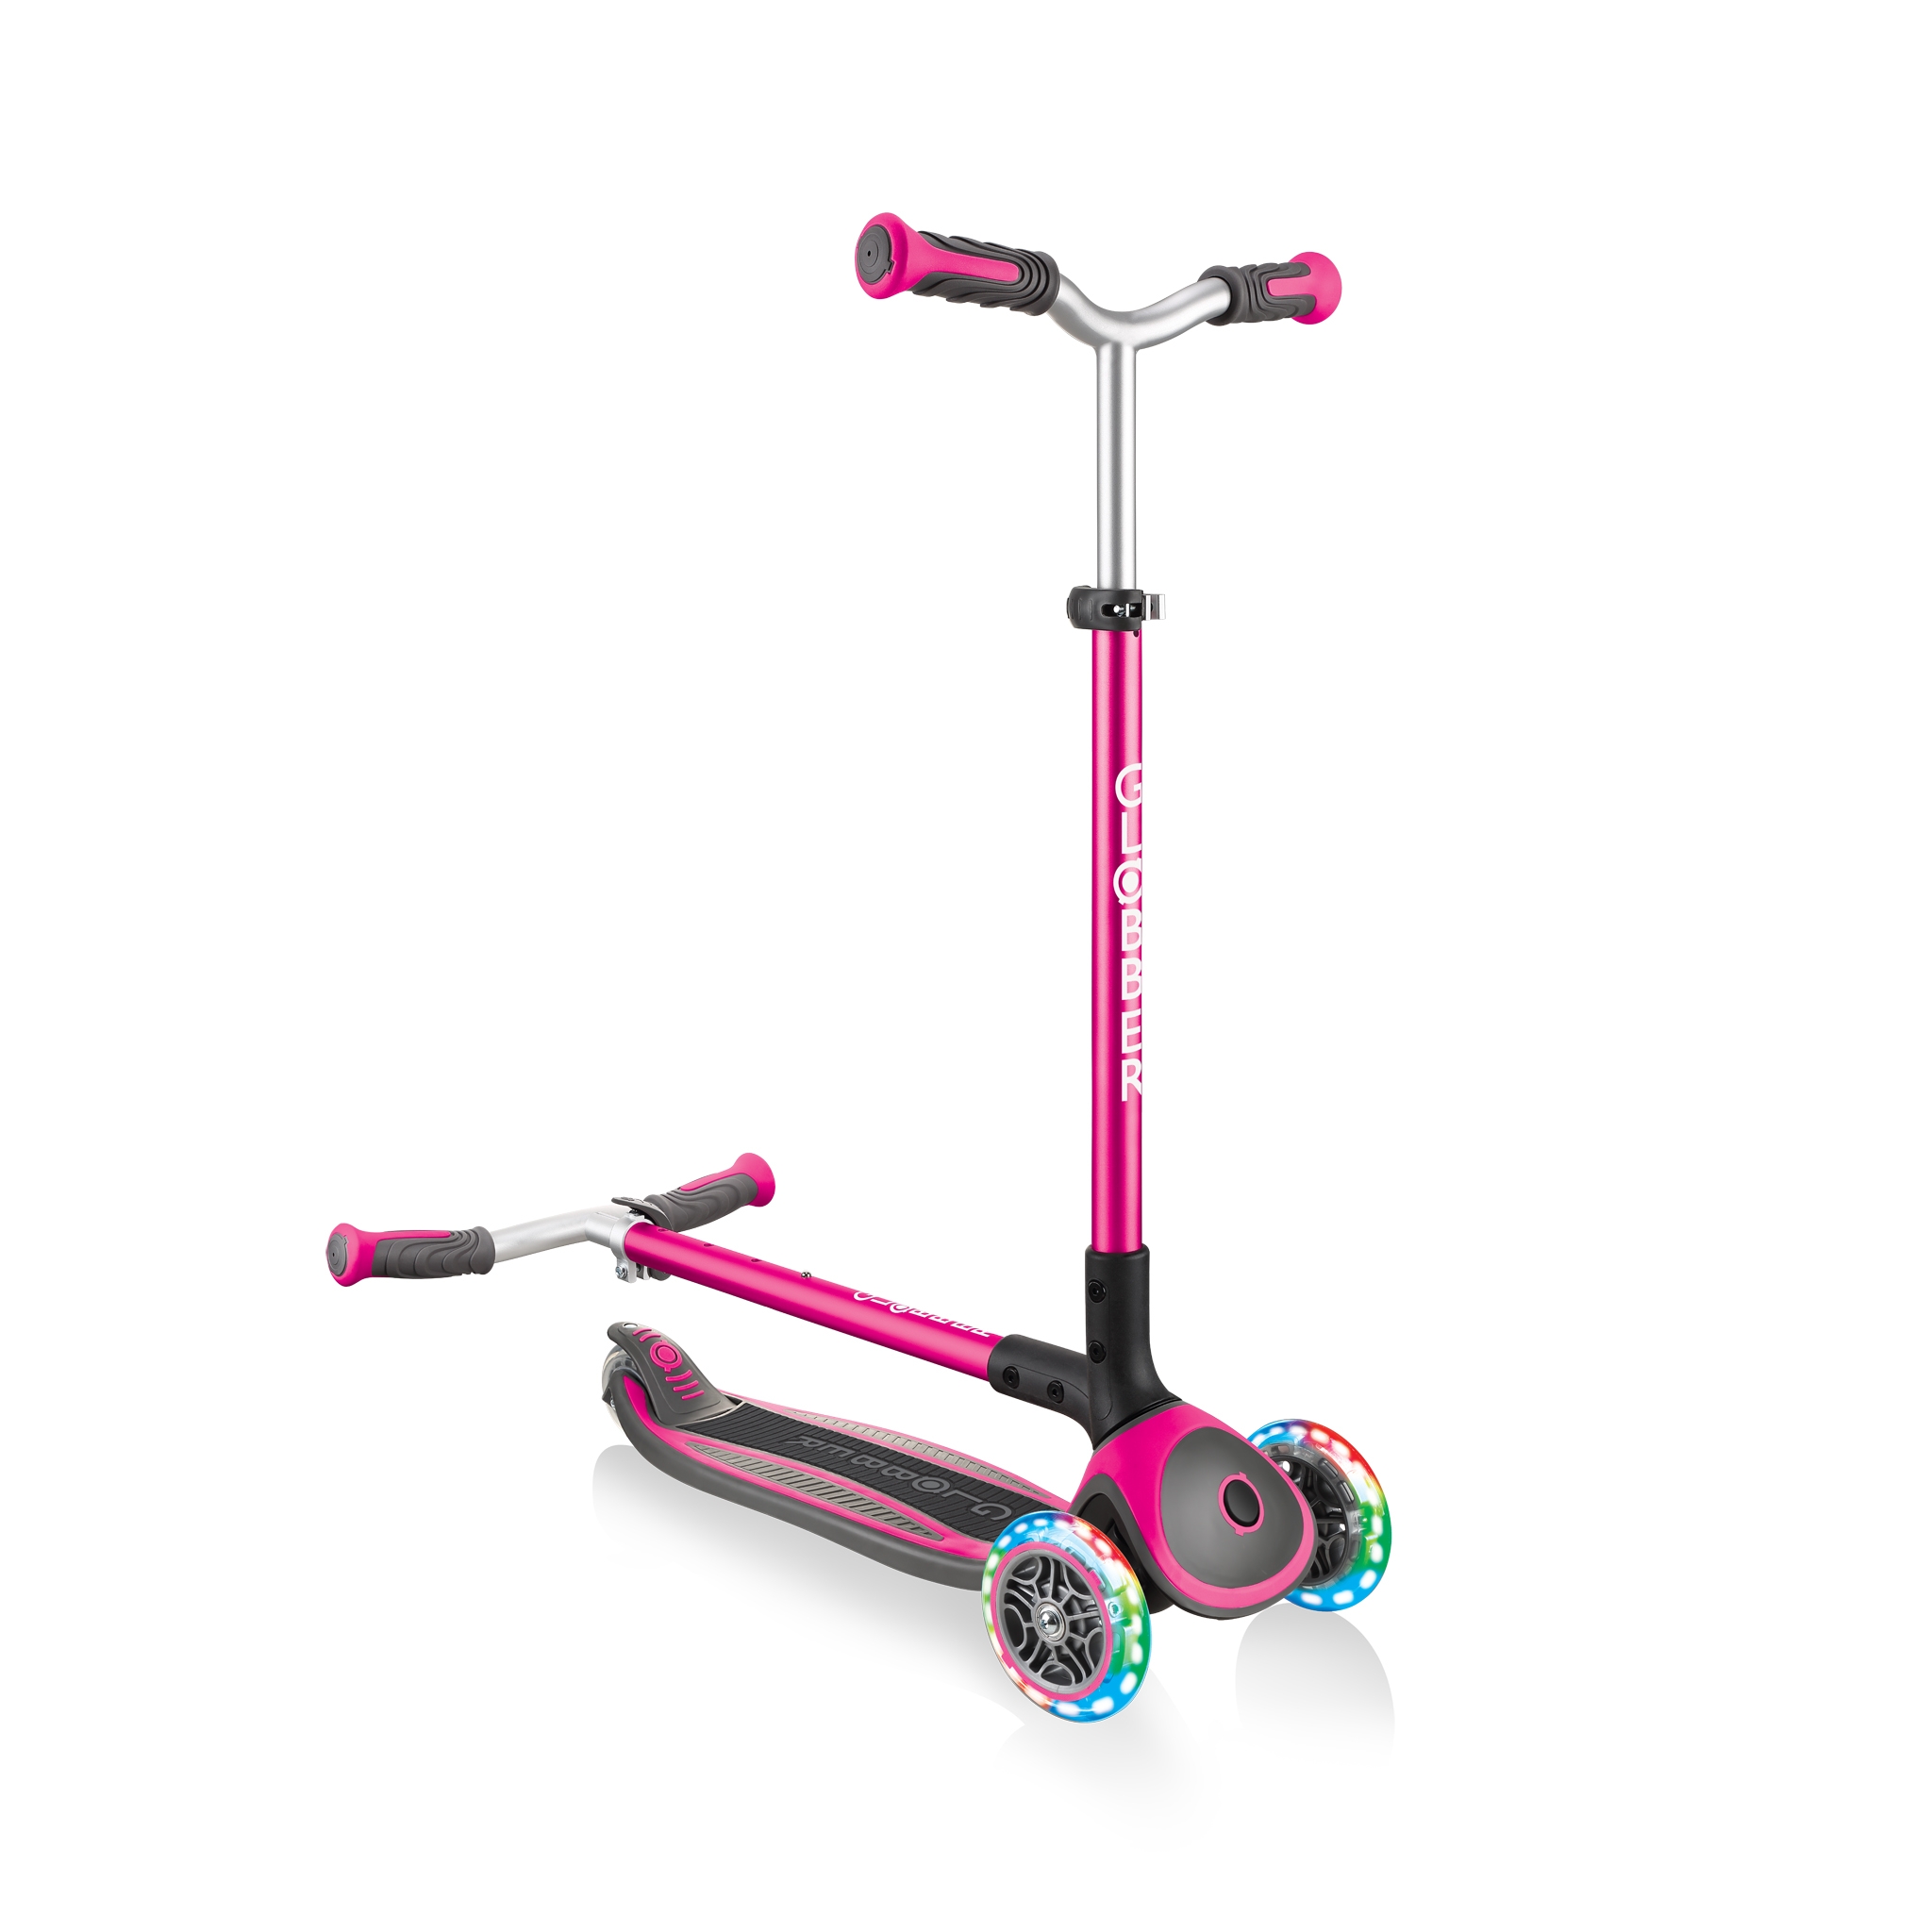 Globber-MASTER-LIGHTS-convenient-foldable-3-wheel-light-up-scooter-for-kids-with-patented-folding-system_deep-pink 3